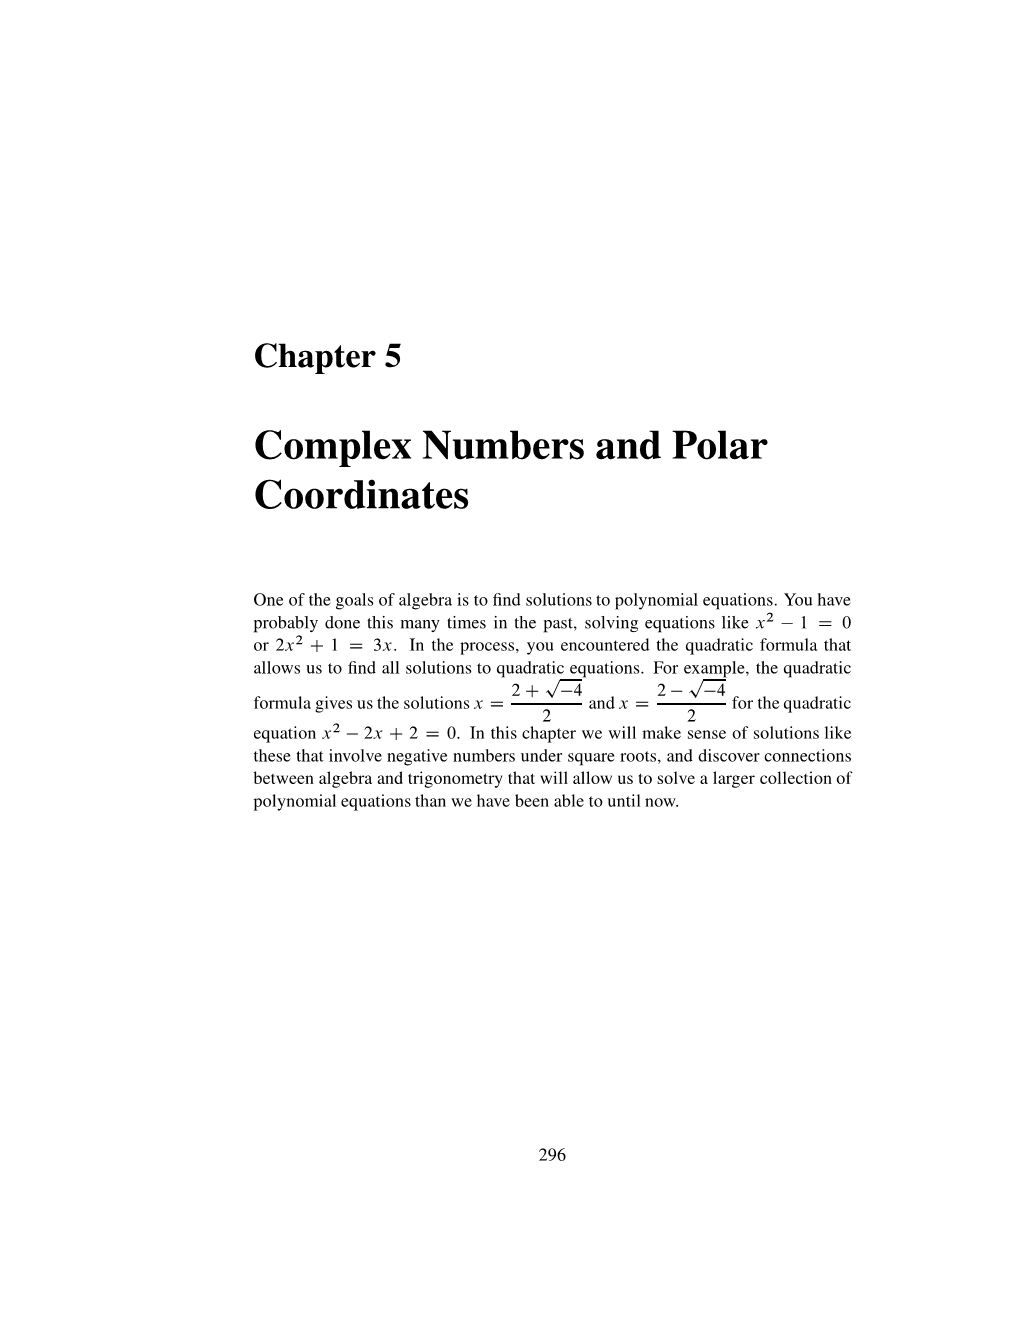 Complex Numbers and Polar Coordinates